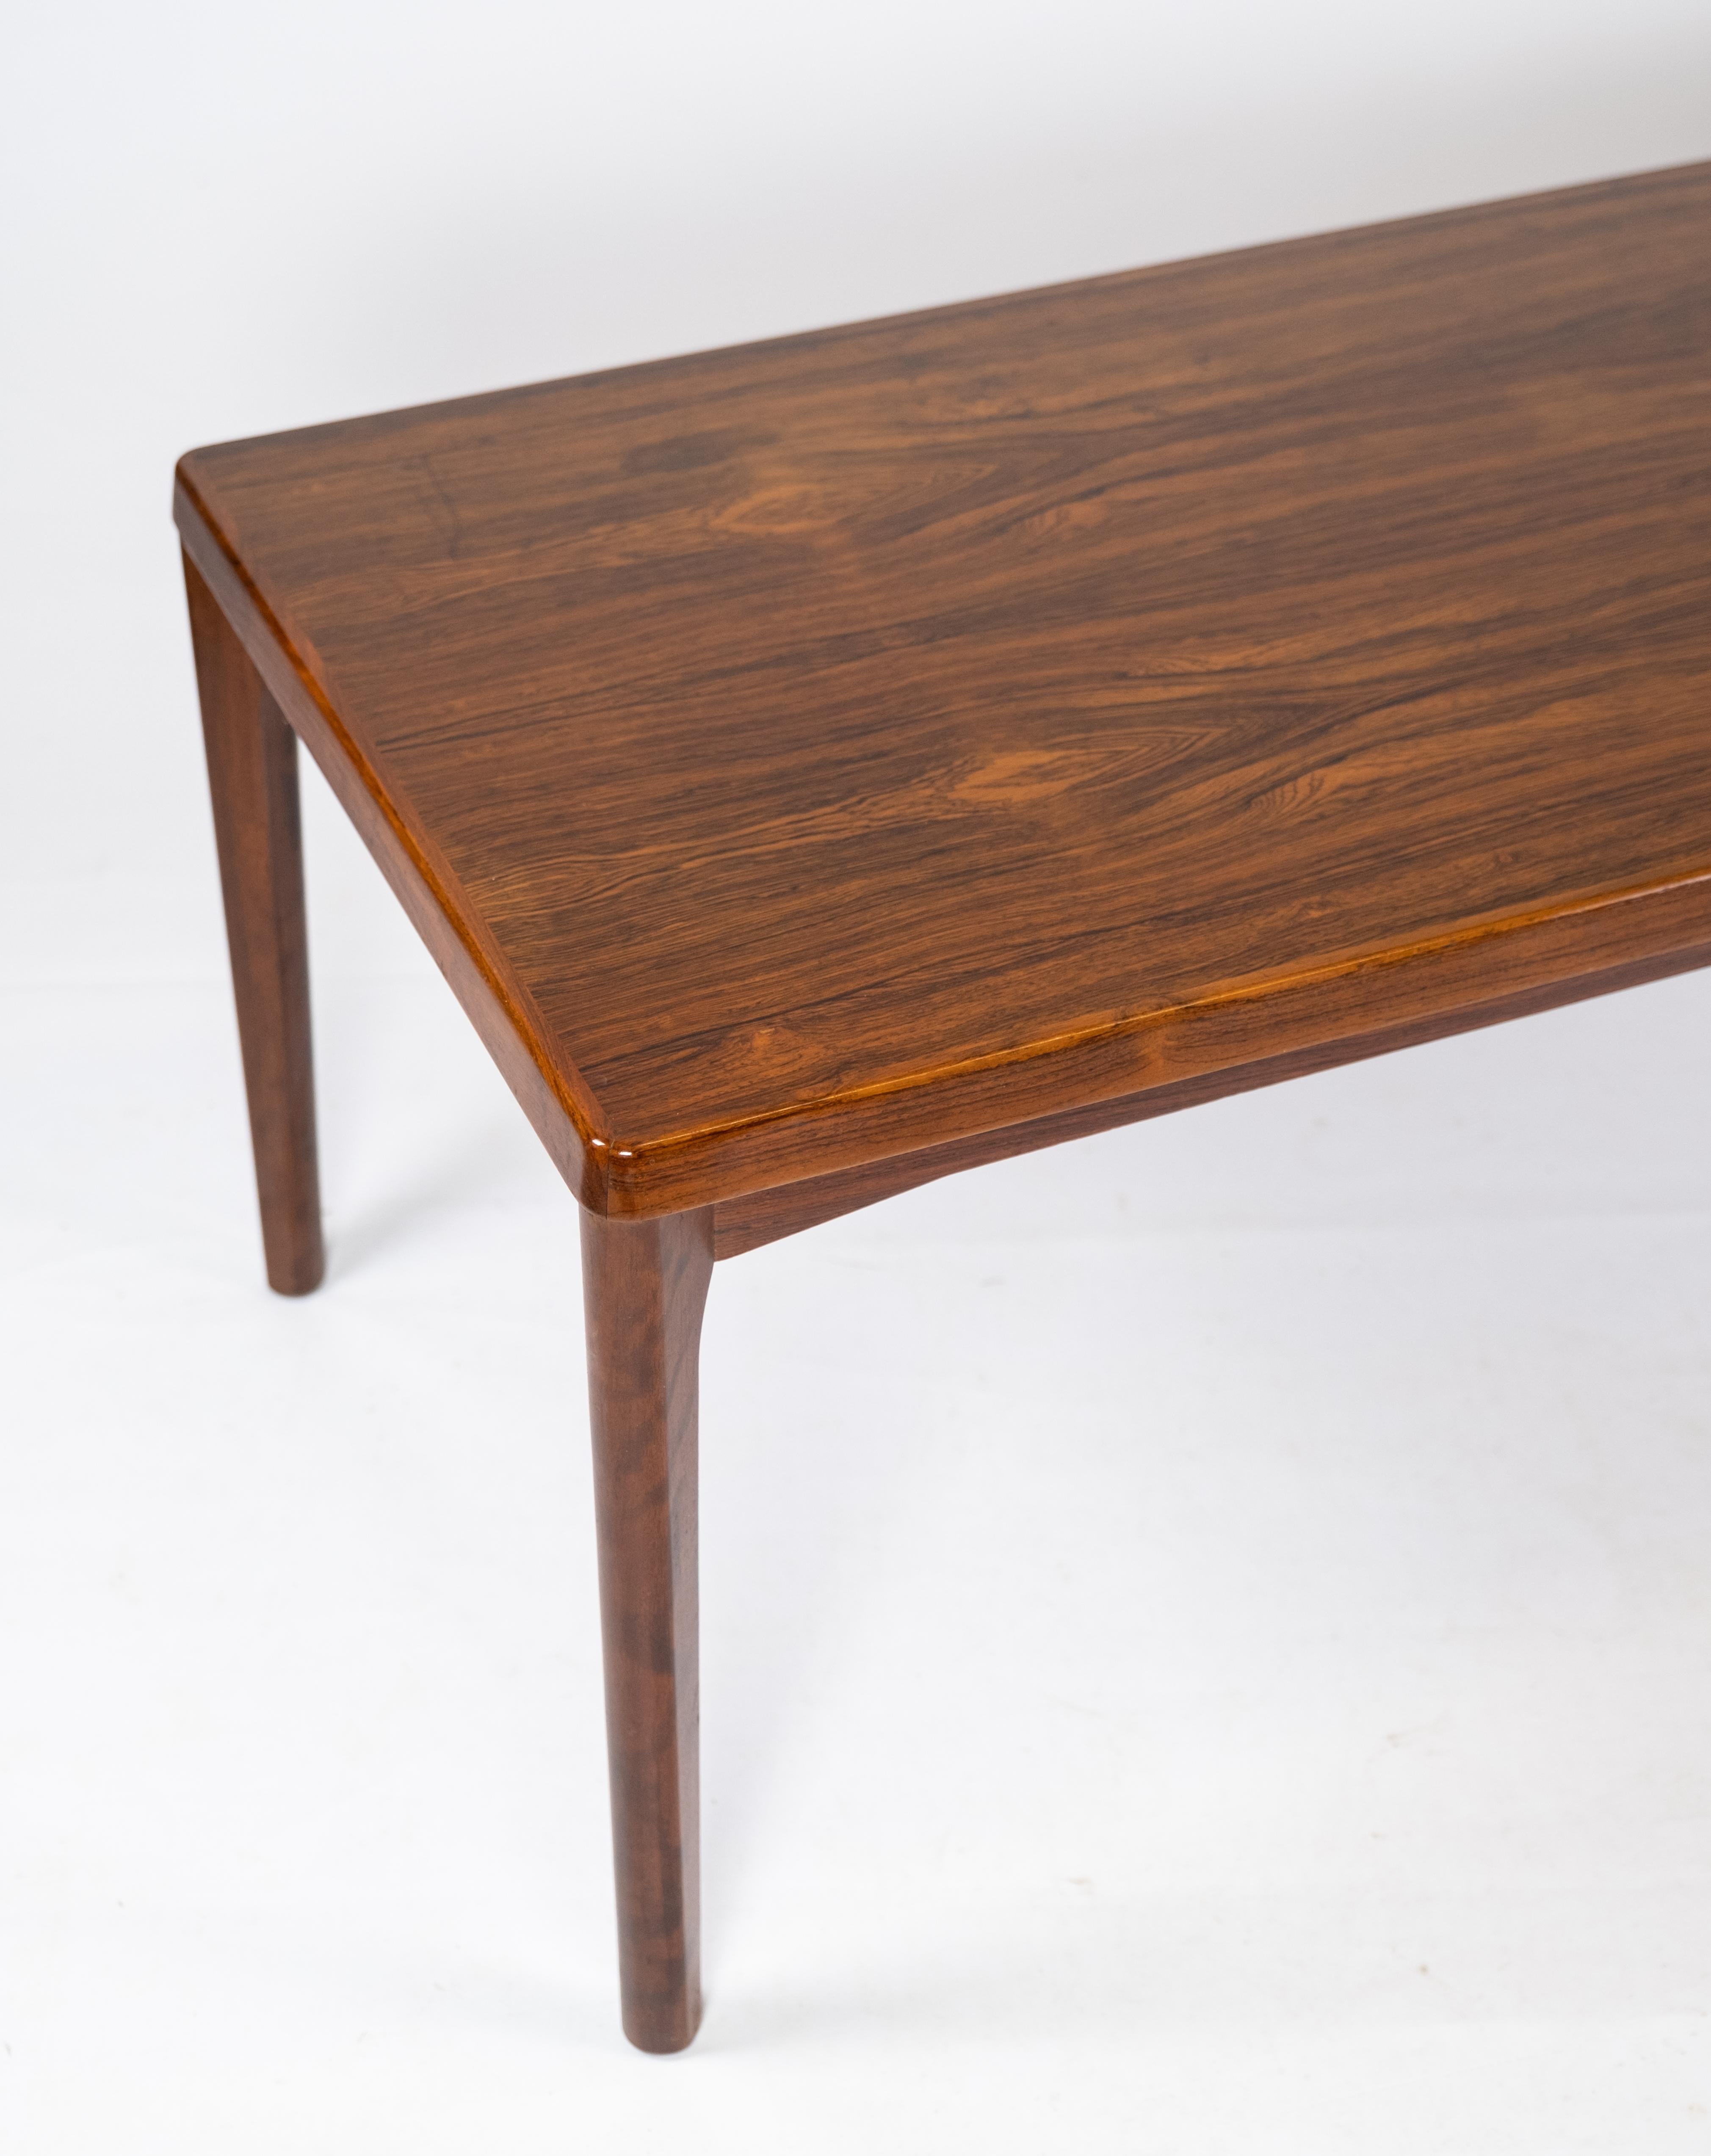 This coffee table, crafted from luxurious rosewood, represents the epitome of Danish design excellence. Designed by the renowned Henning Kjærnulf and manufactured by Vejle Furniture Factory in the 1960s, it embodies the quintessential